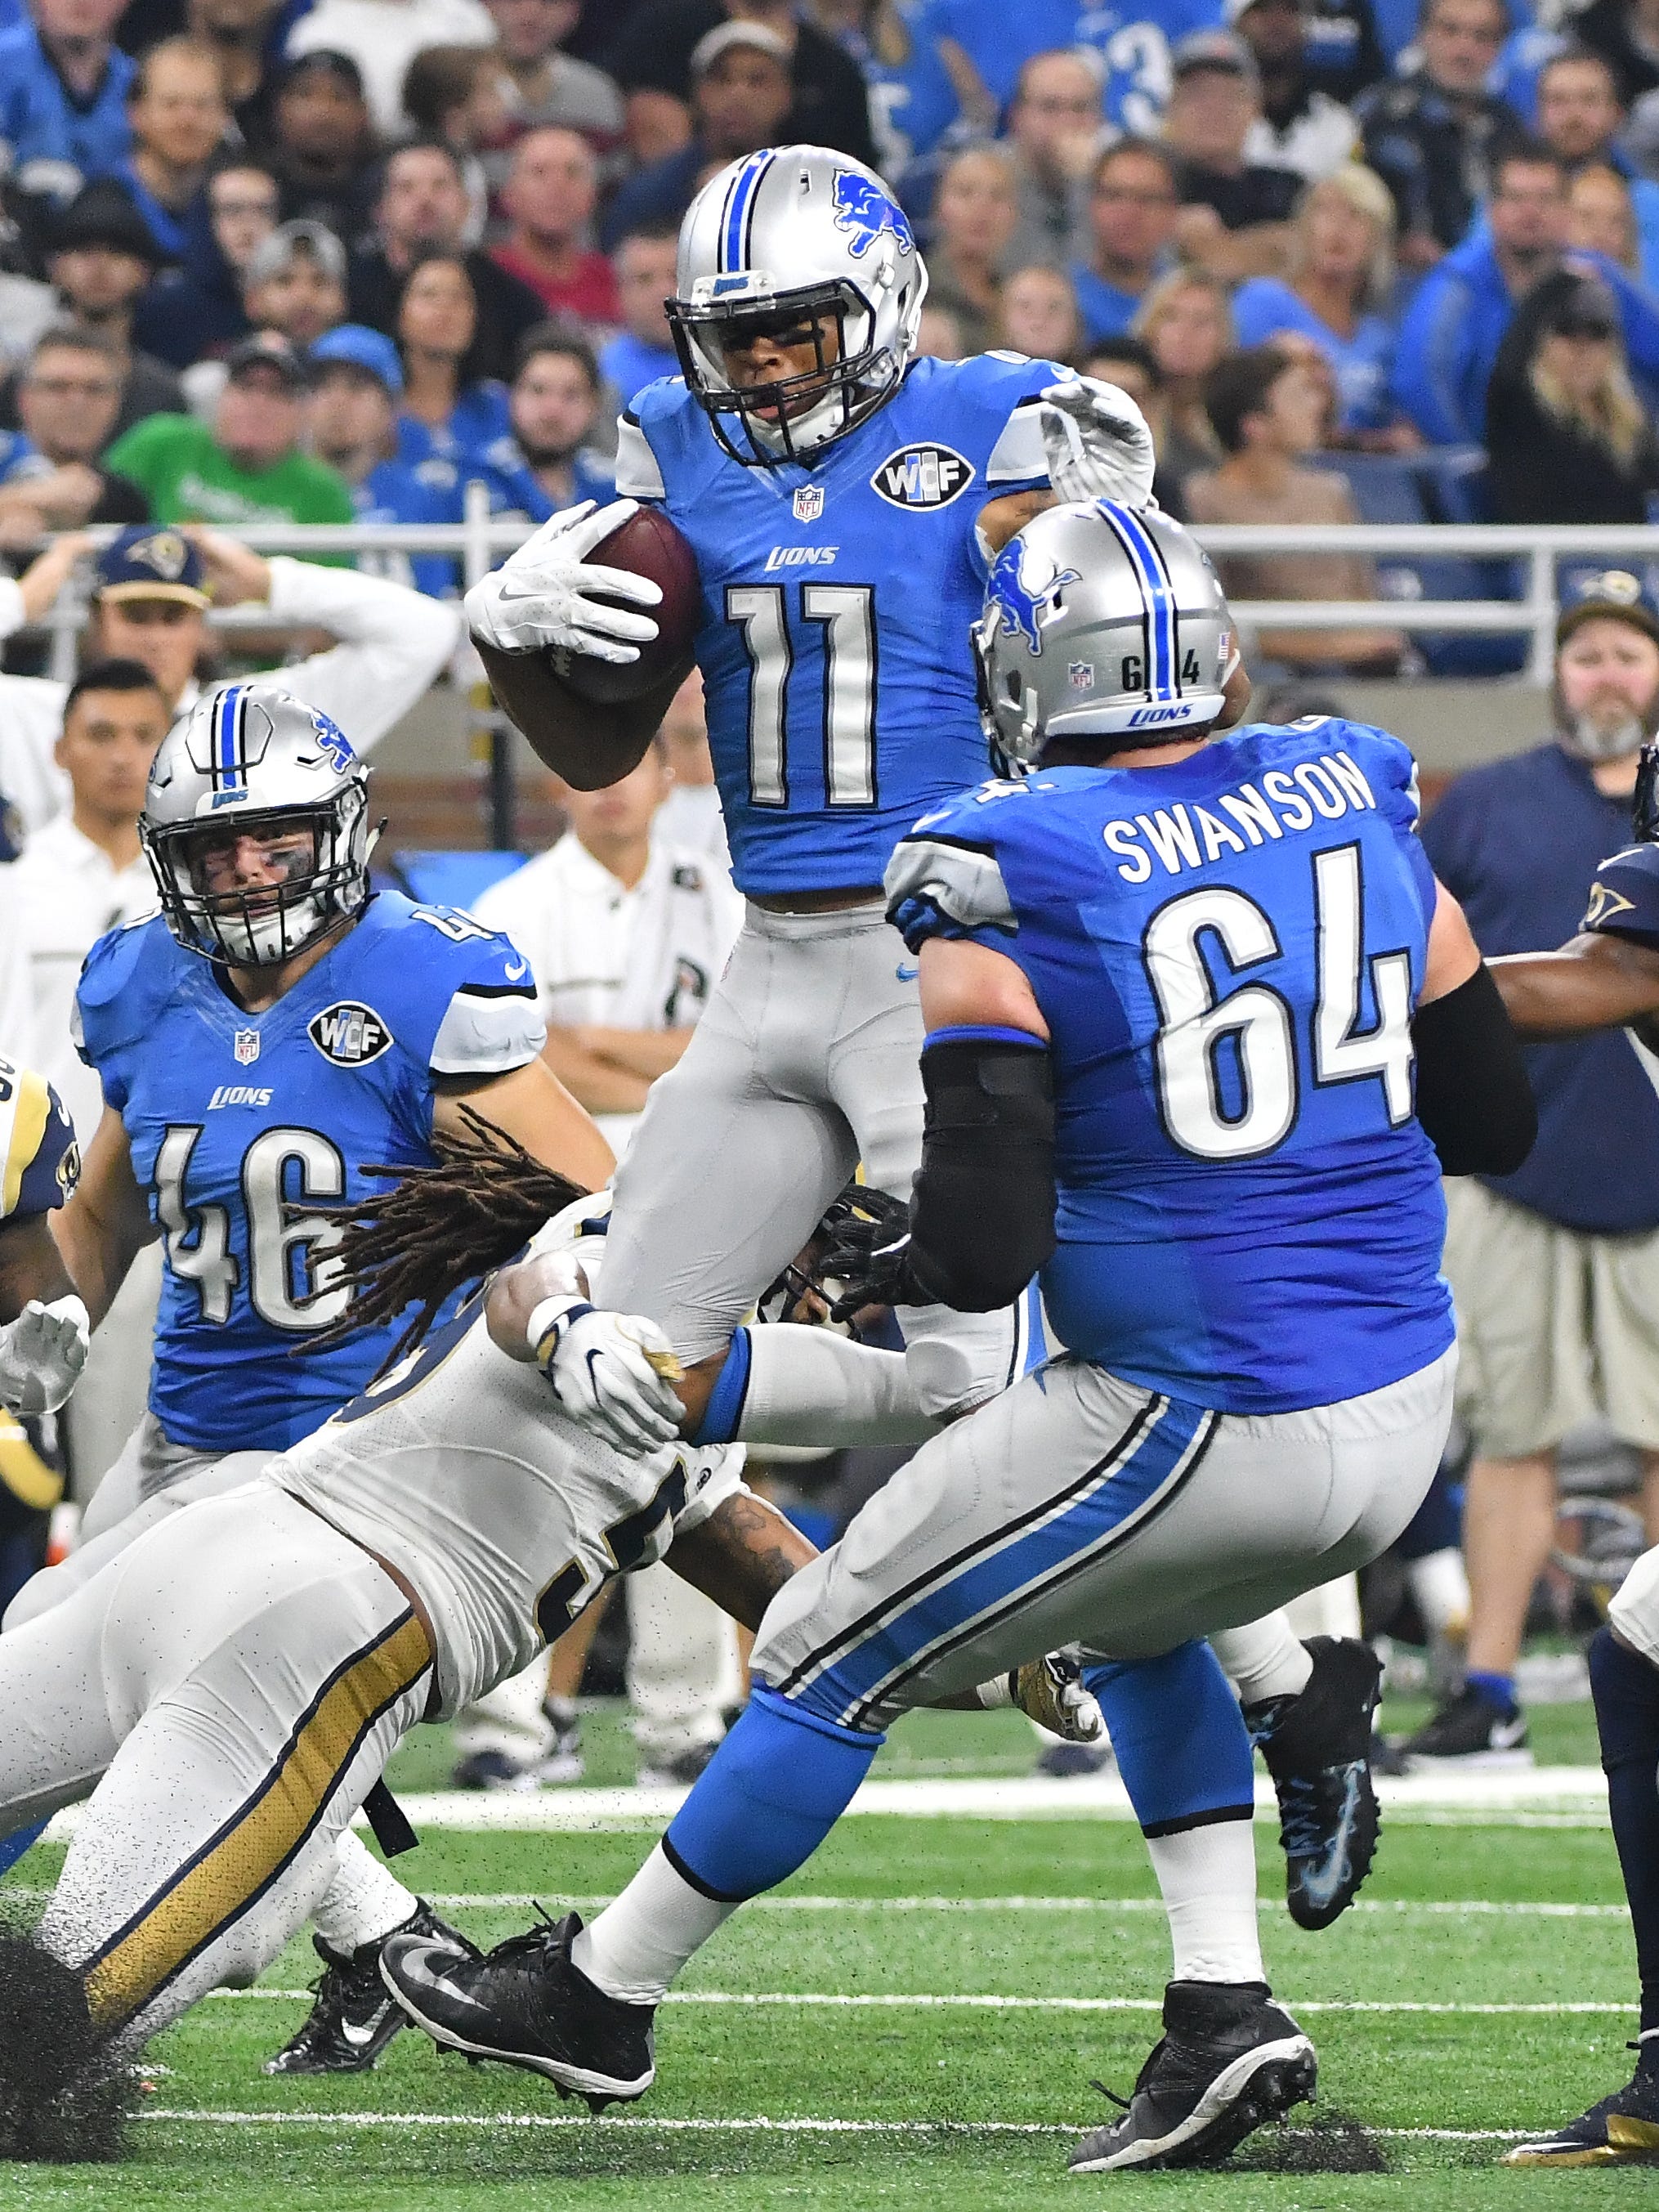 Lions wide receiver Marvin Jones Jr. leaps up trying to gain yardage after a reception in the fourth quarter.